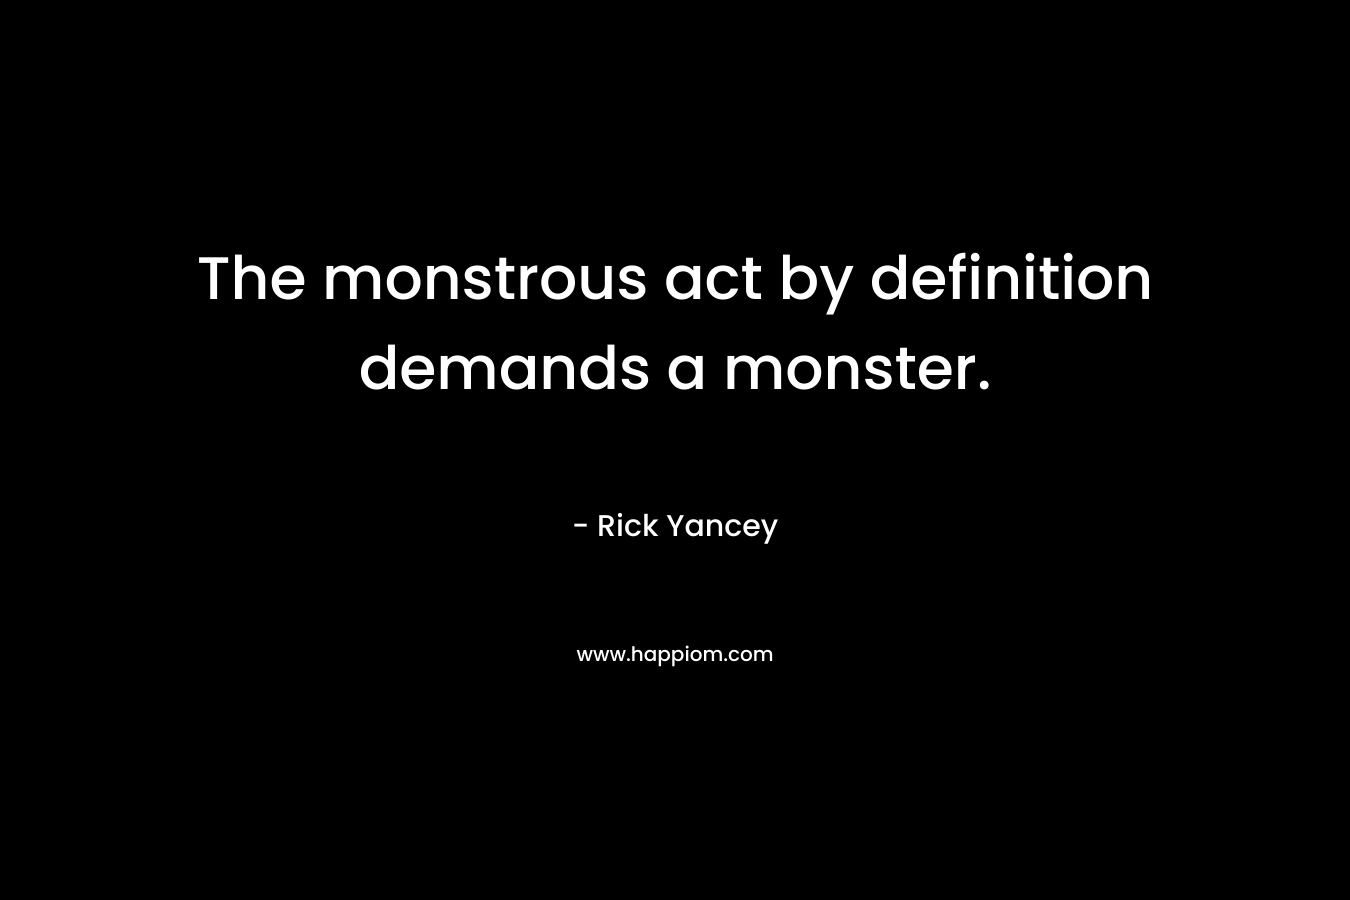 The monstrous act by definition demands a monster.